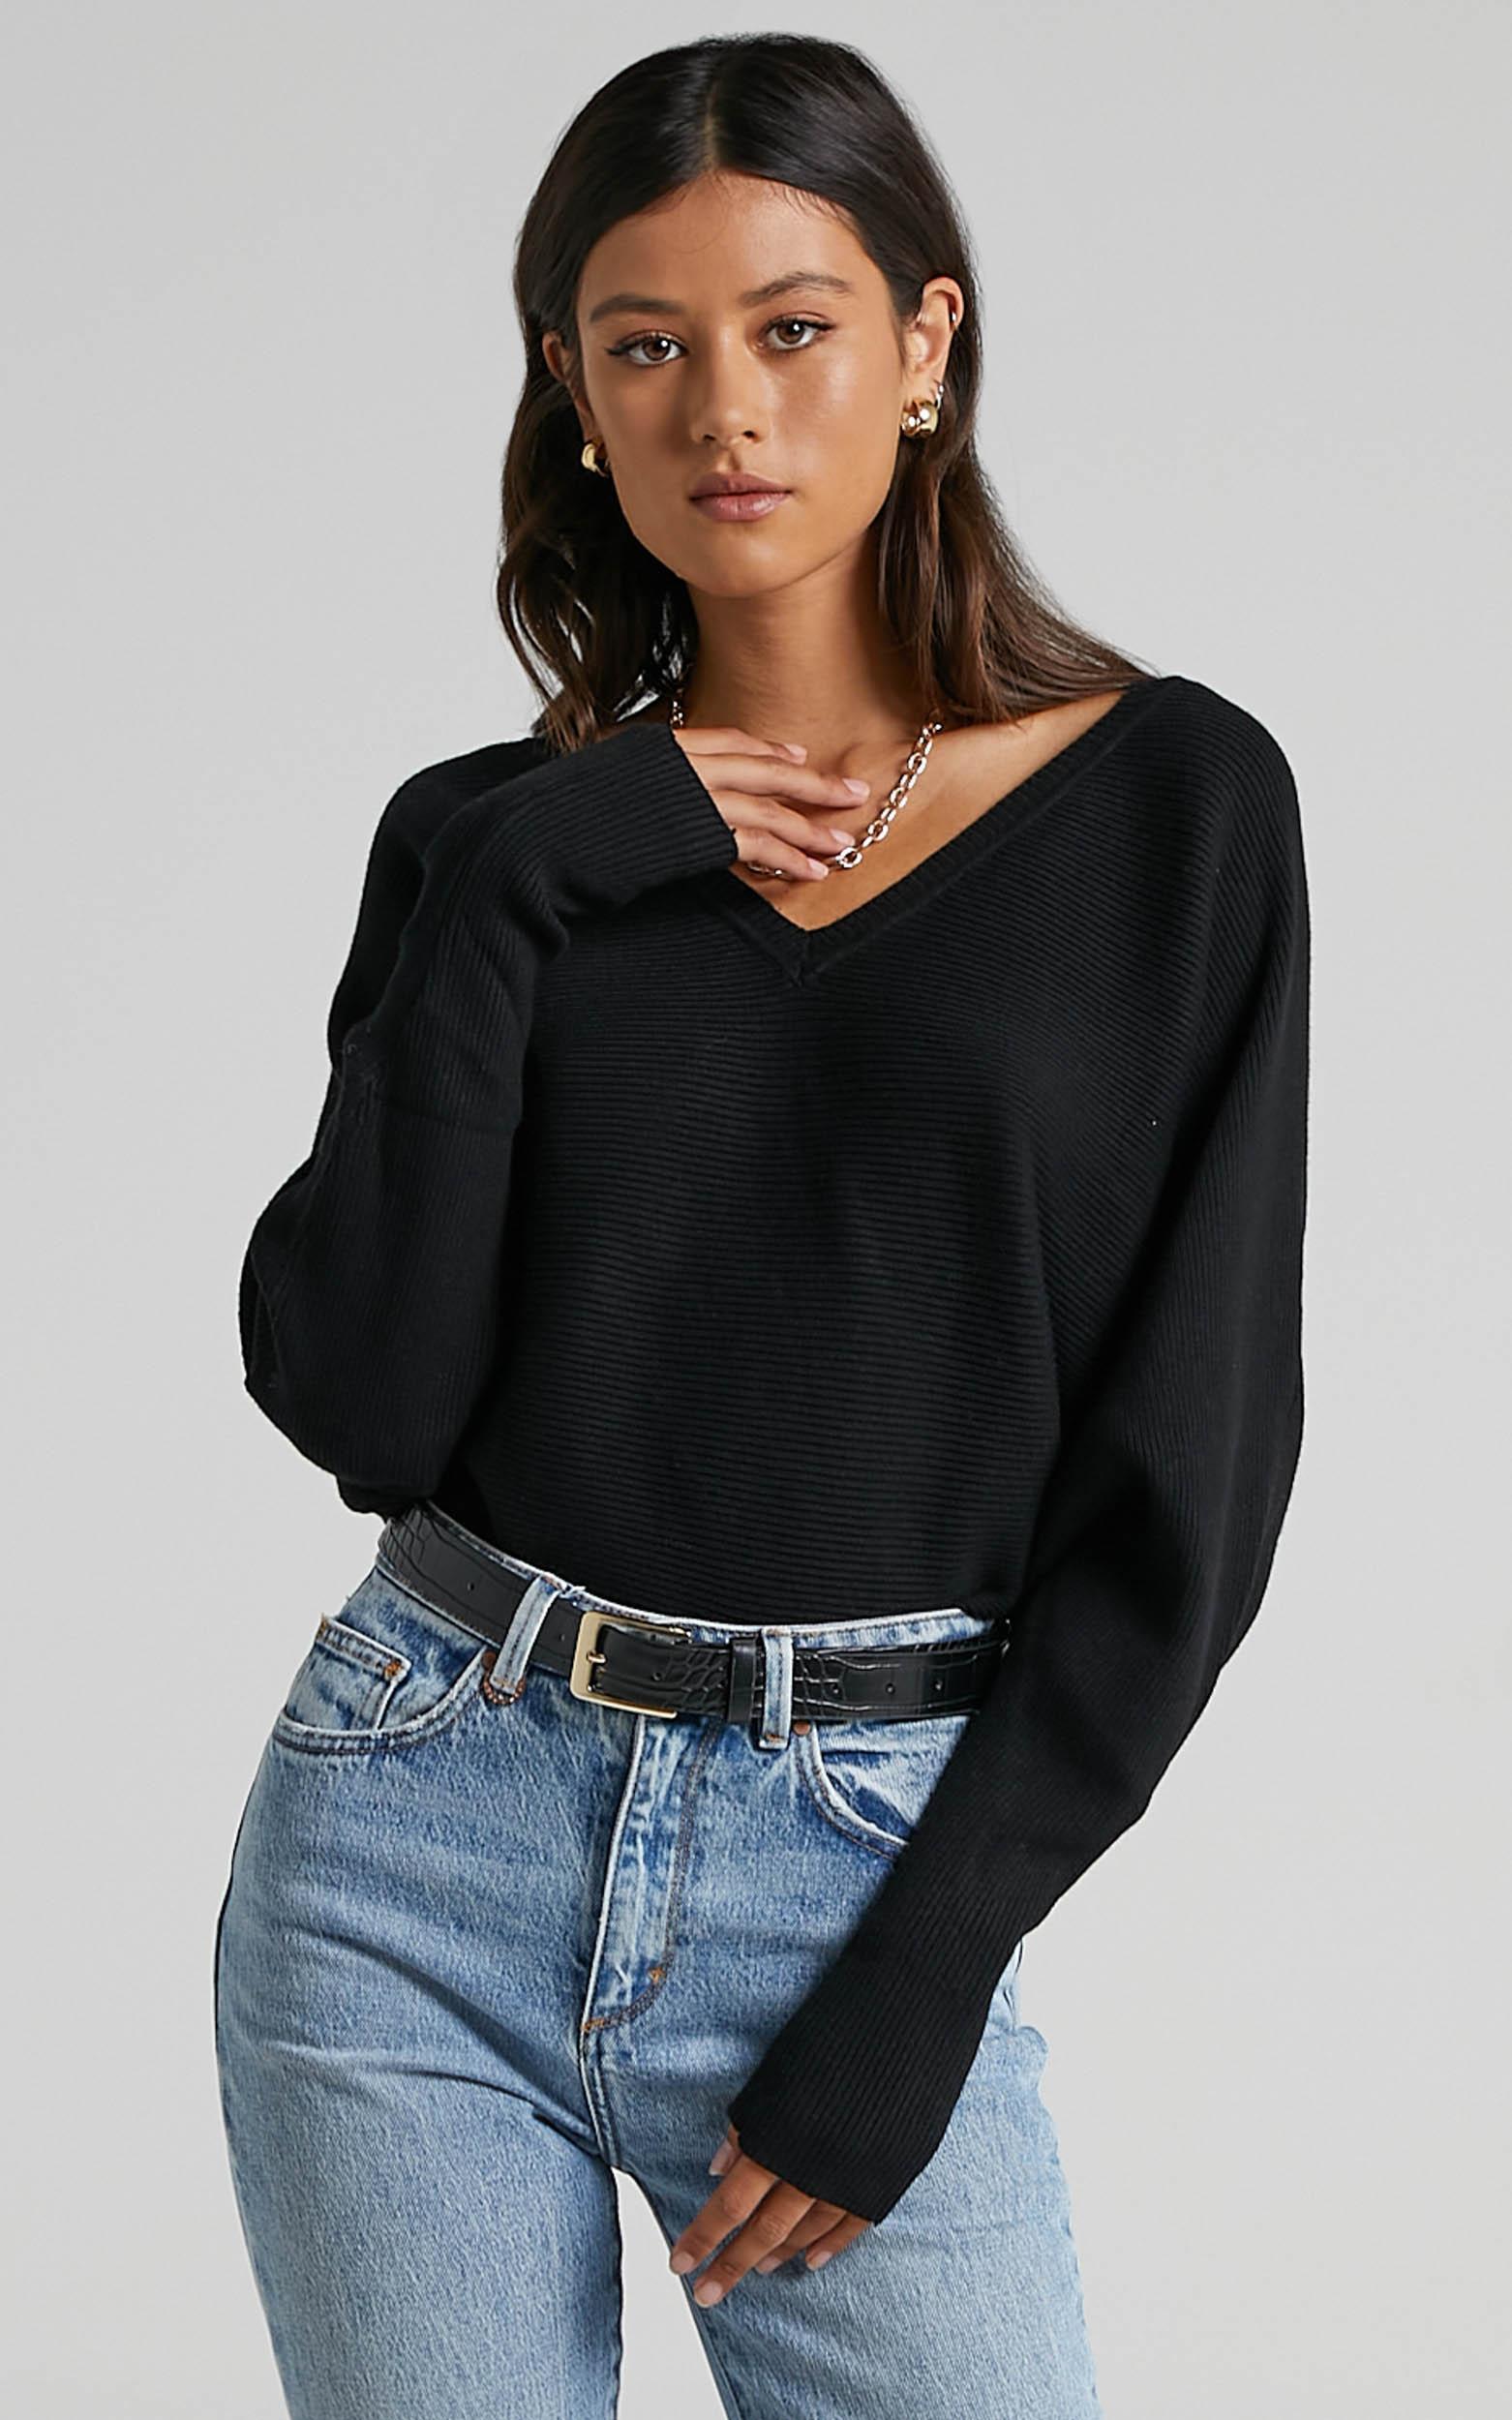 Winning At Life Knit Sweater in Black - 14, BLK1, hi-res image number null